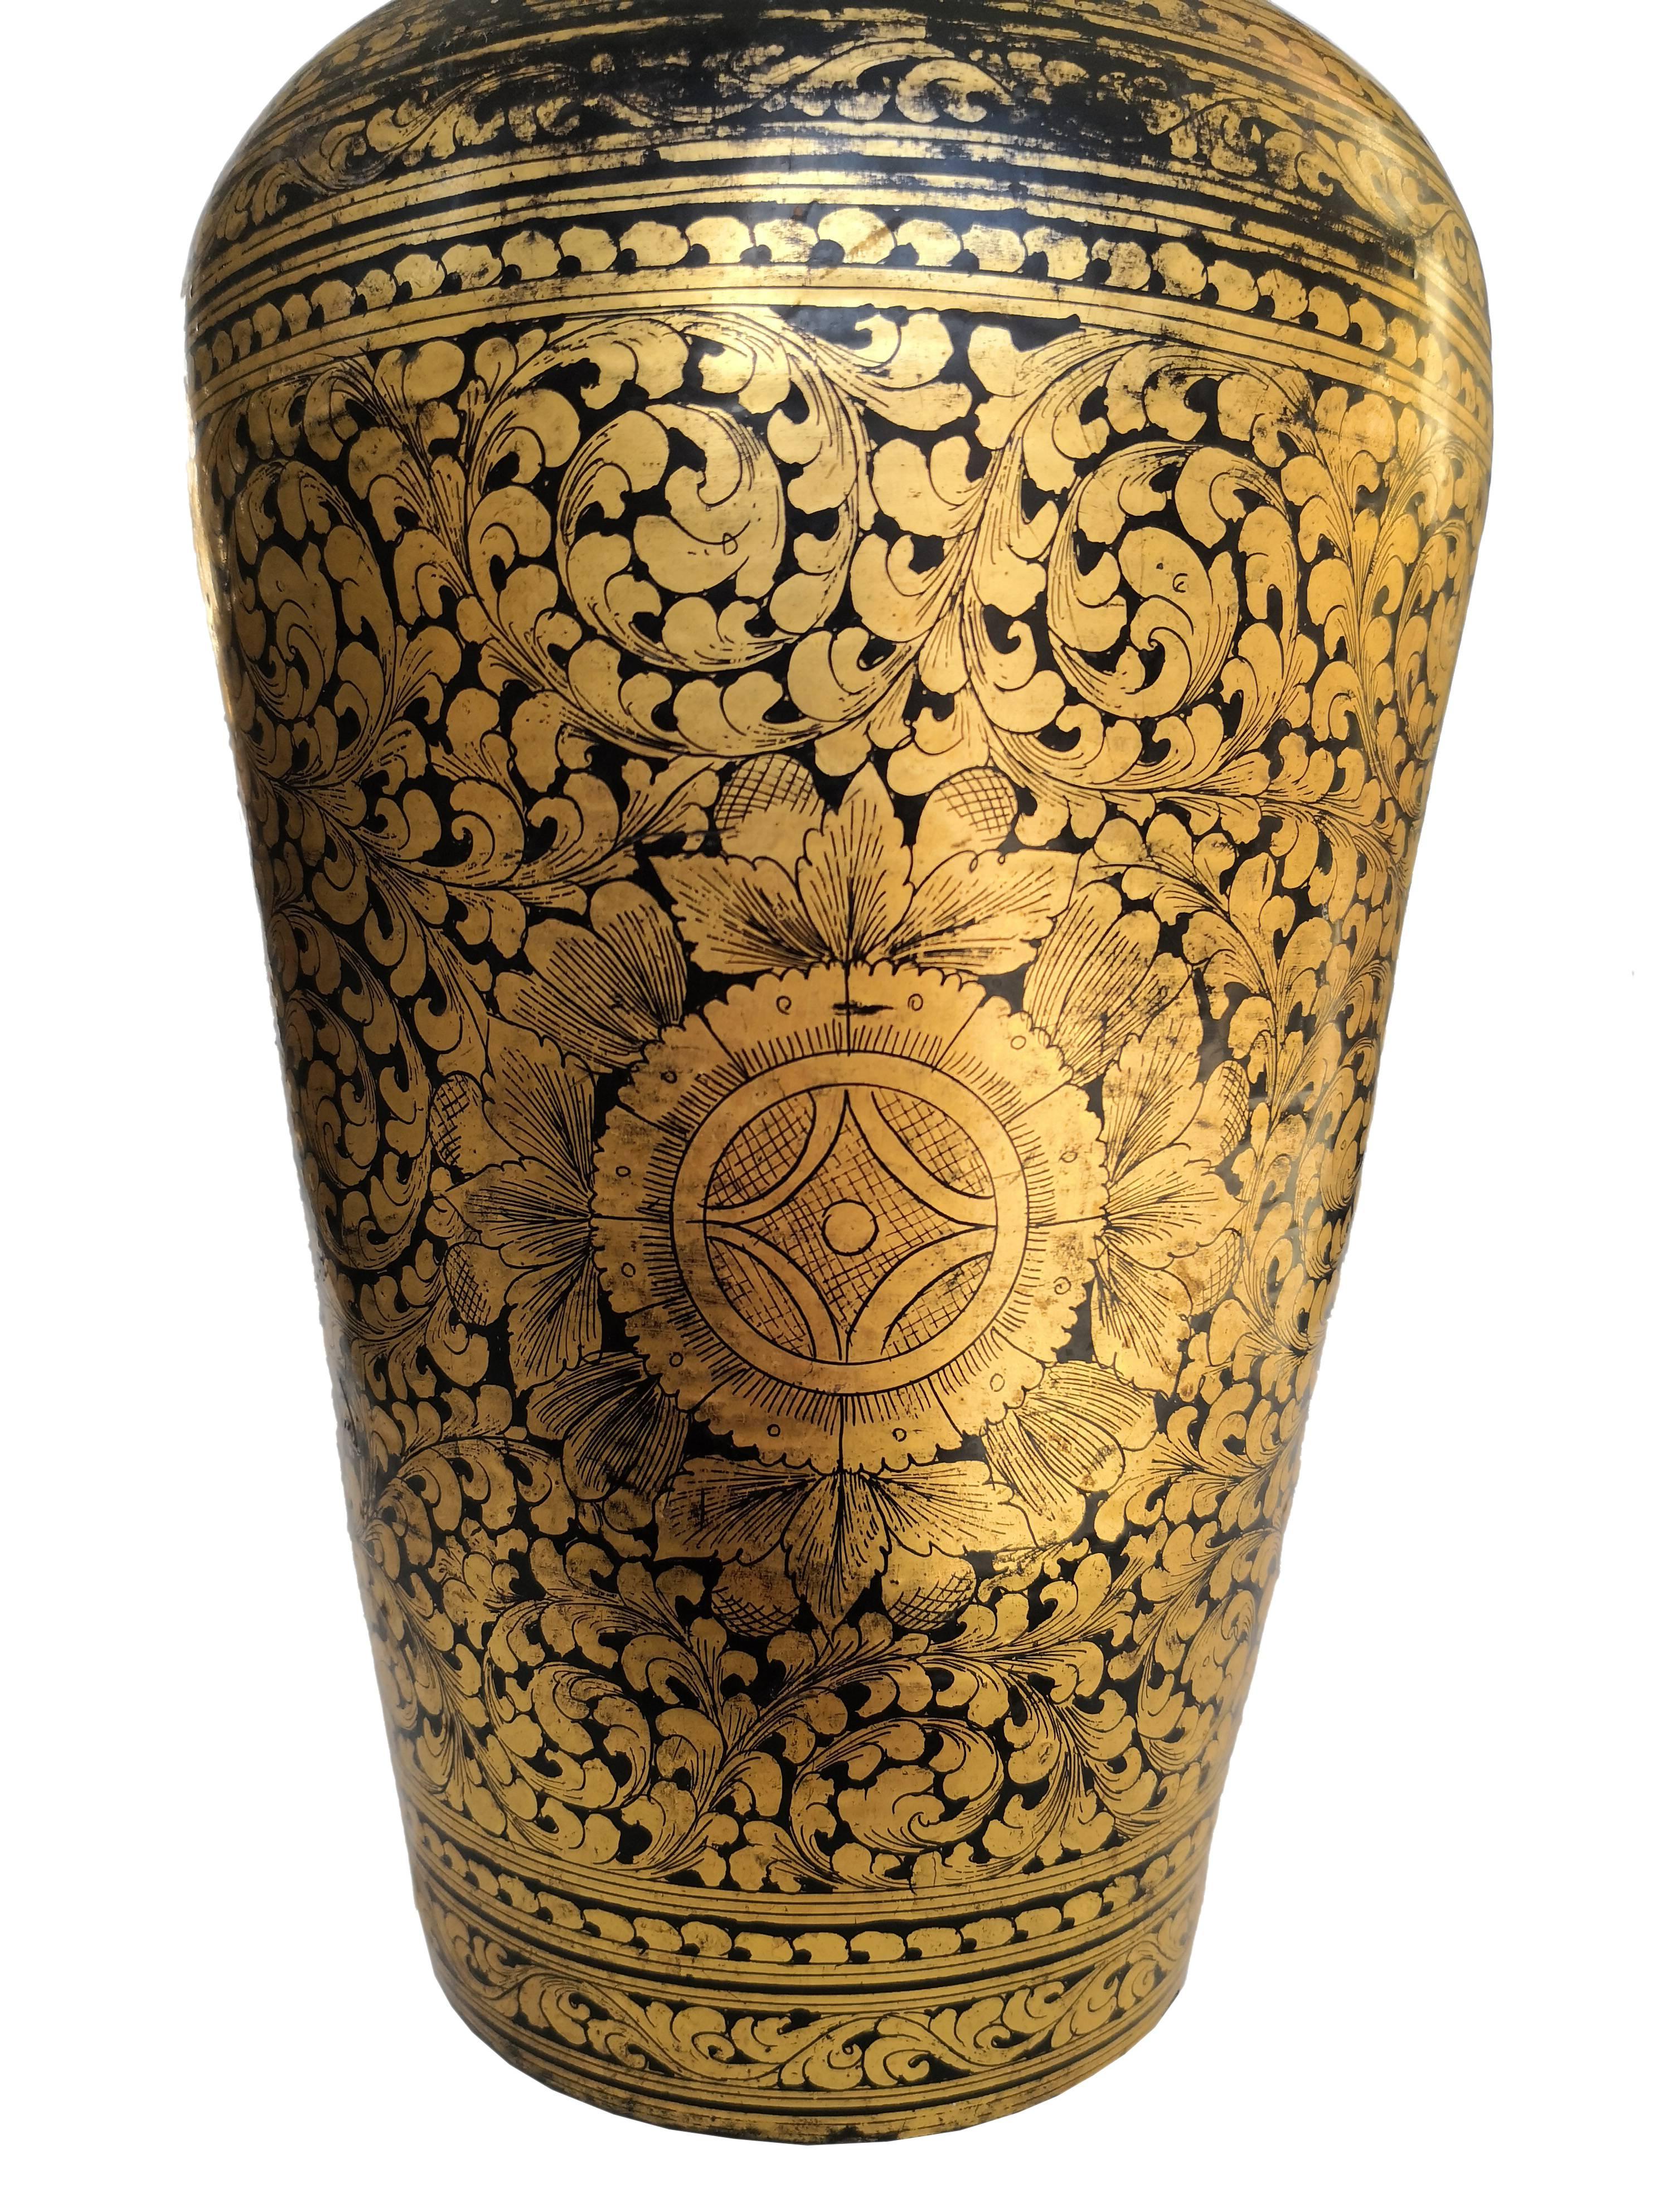 Unique Chinese black lacquered antique vase with detailed ornamental handmade decoration in 24-carat gold by specialized craftsmen.

